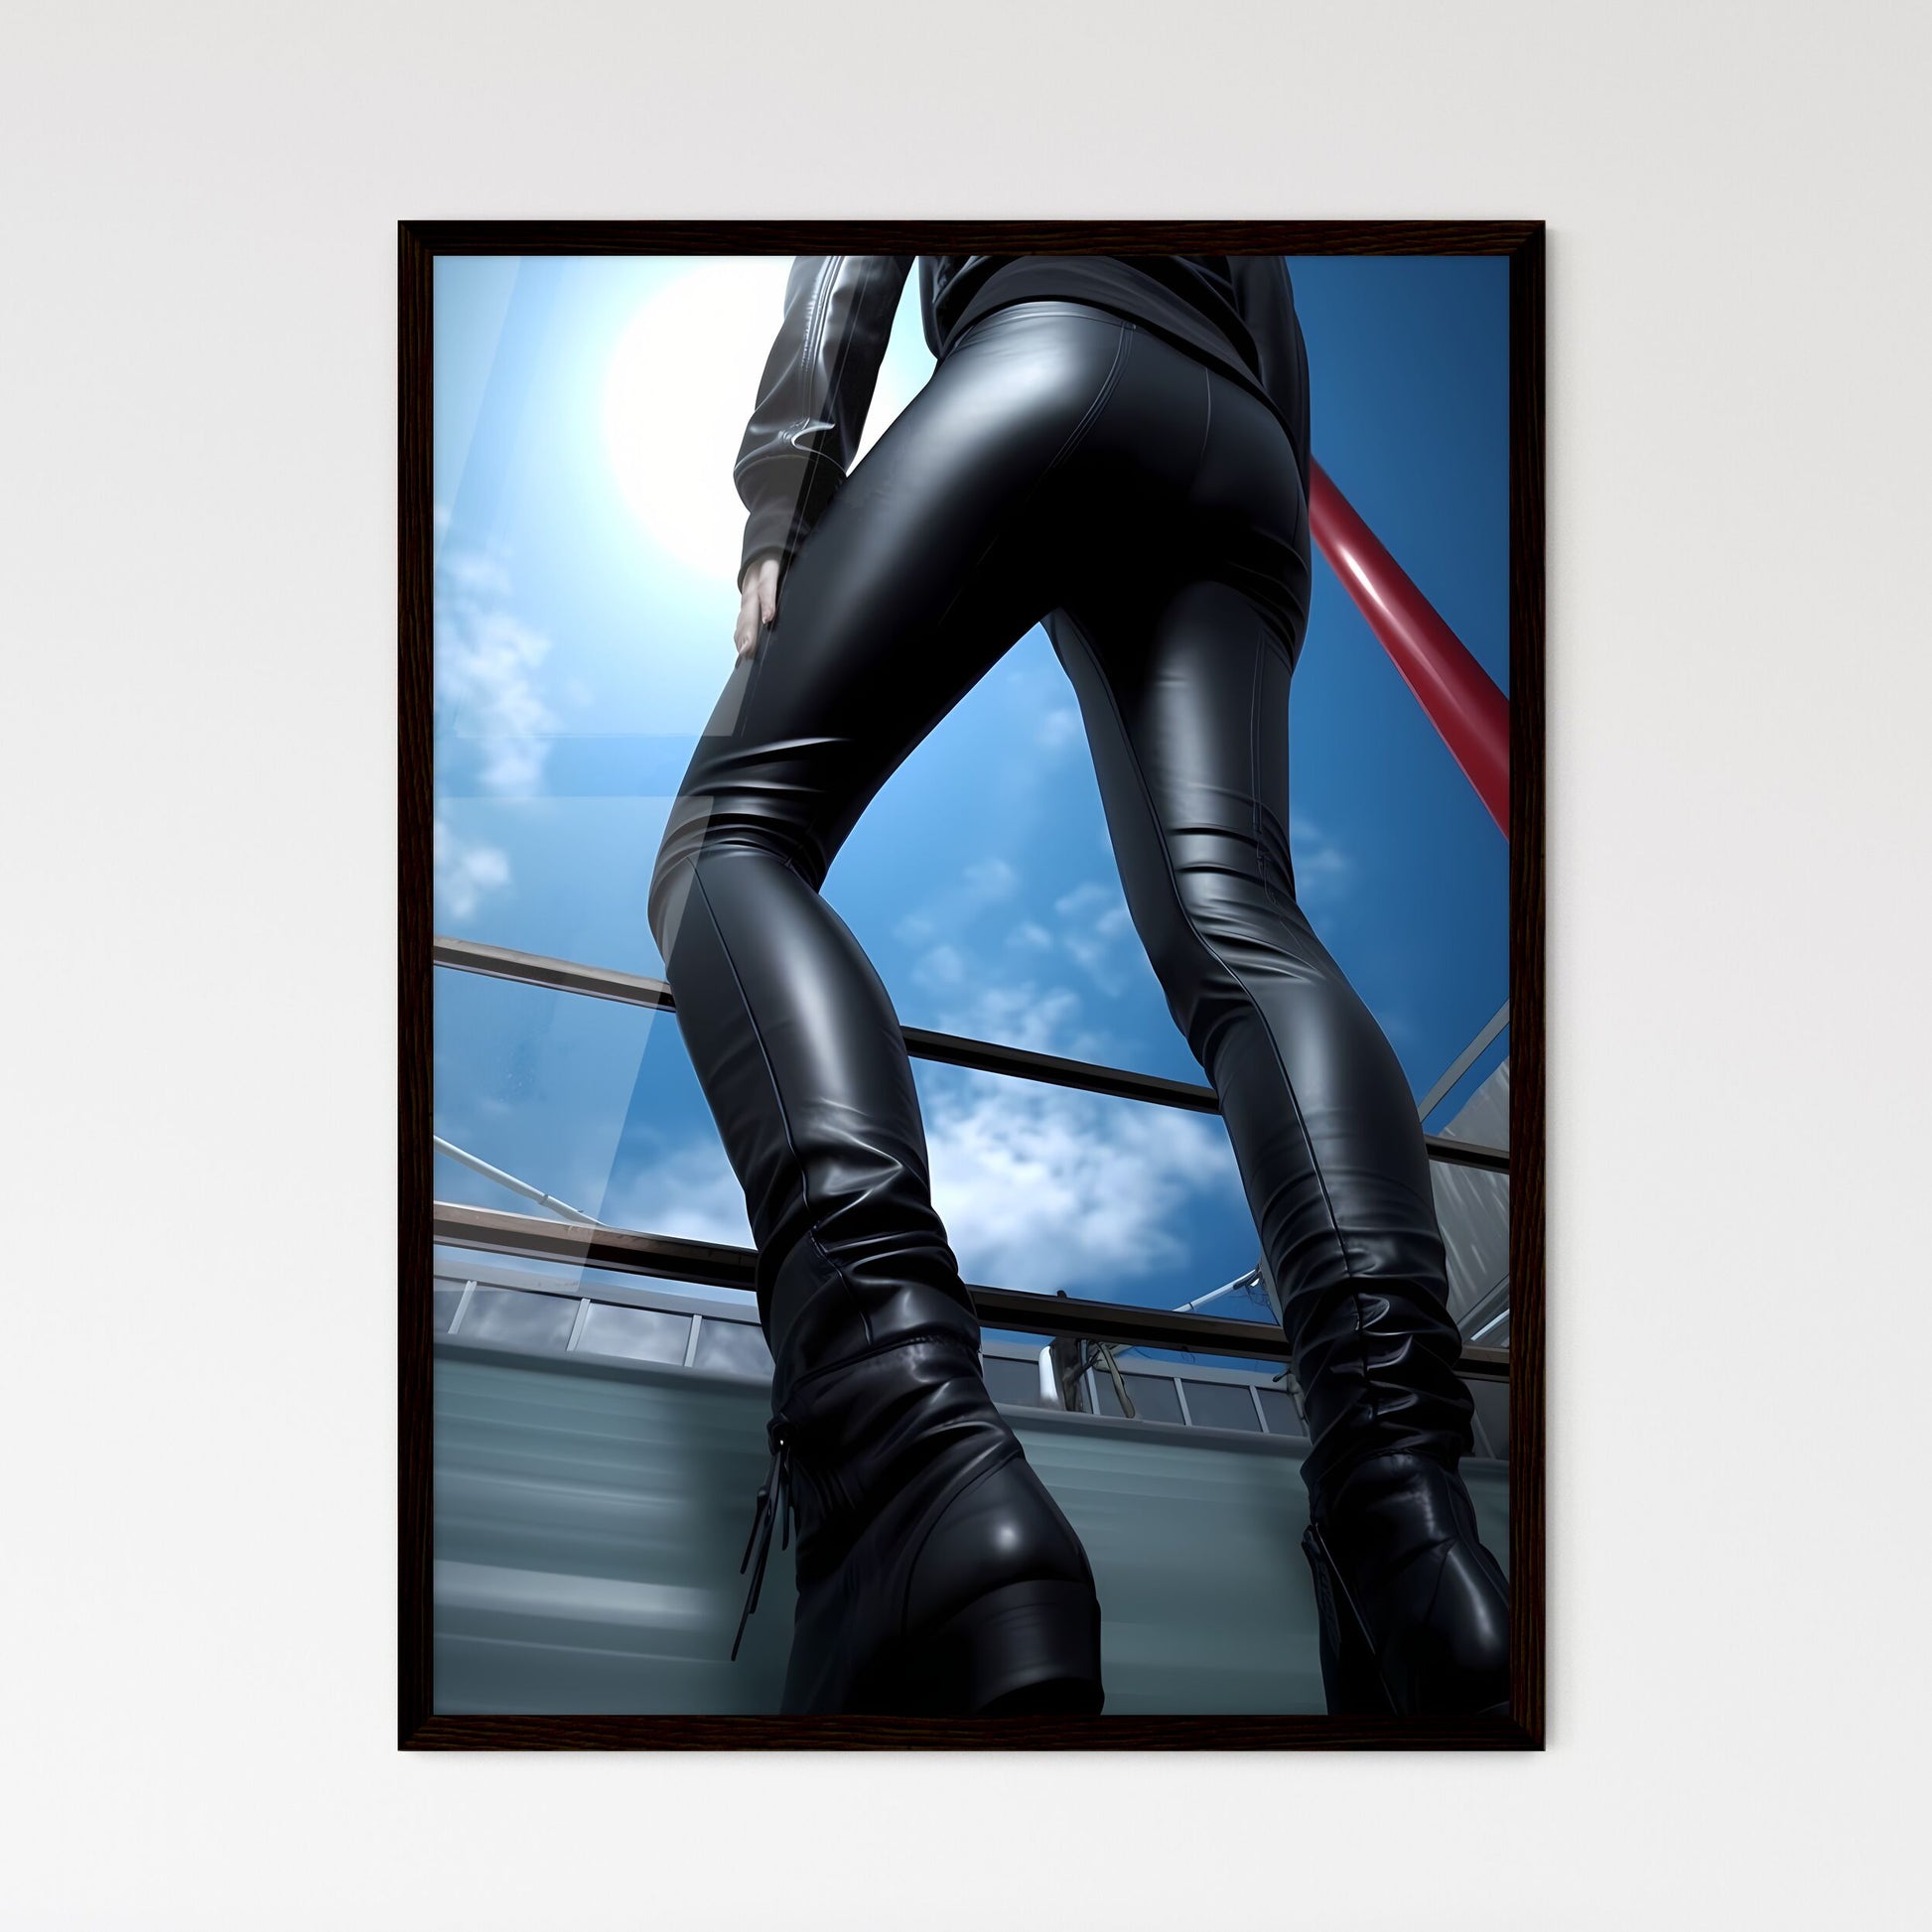 A Poster of female black skintight leather pants hips - A Person Wearing  Black Leather Pants And High Heels by HEBSTREIT